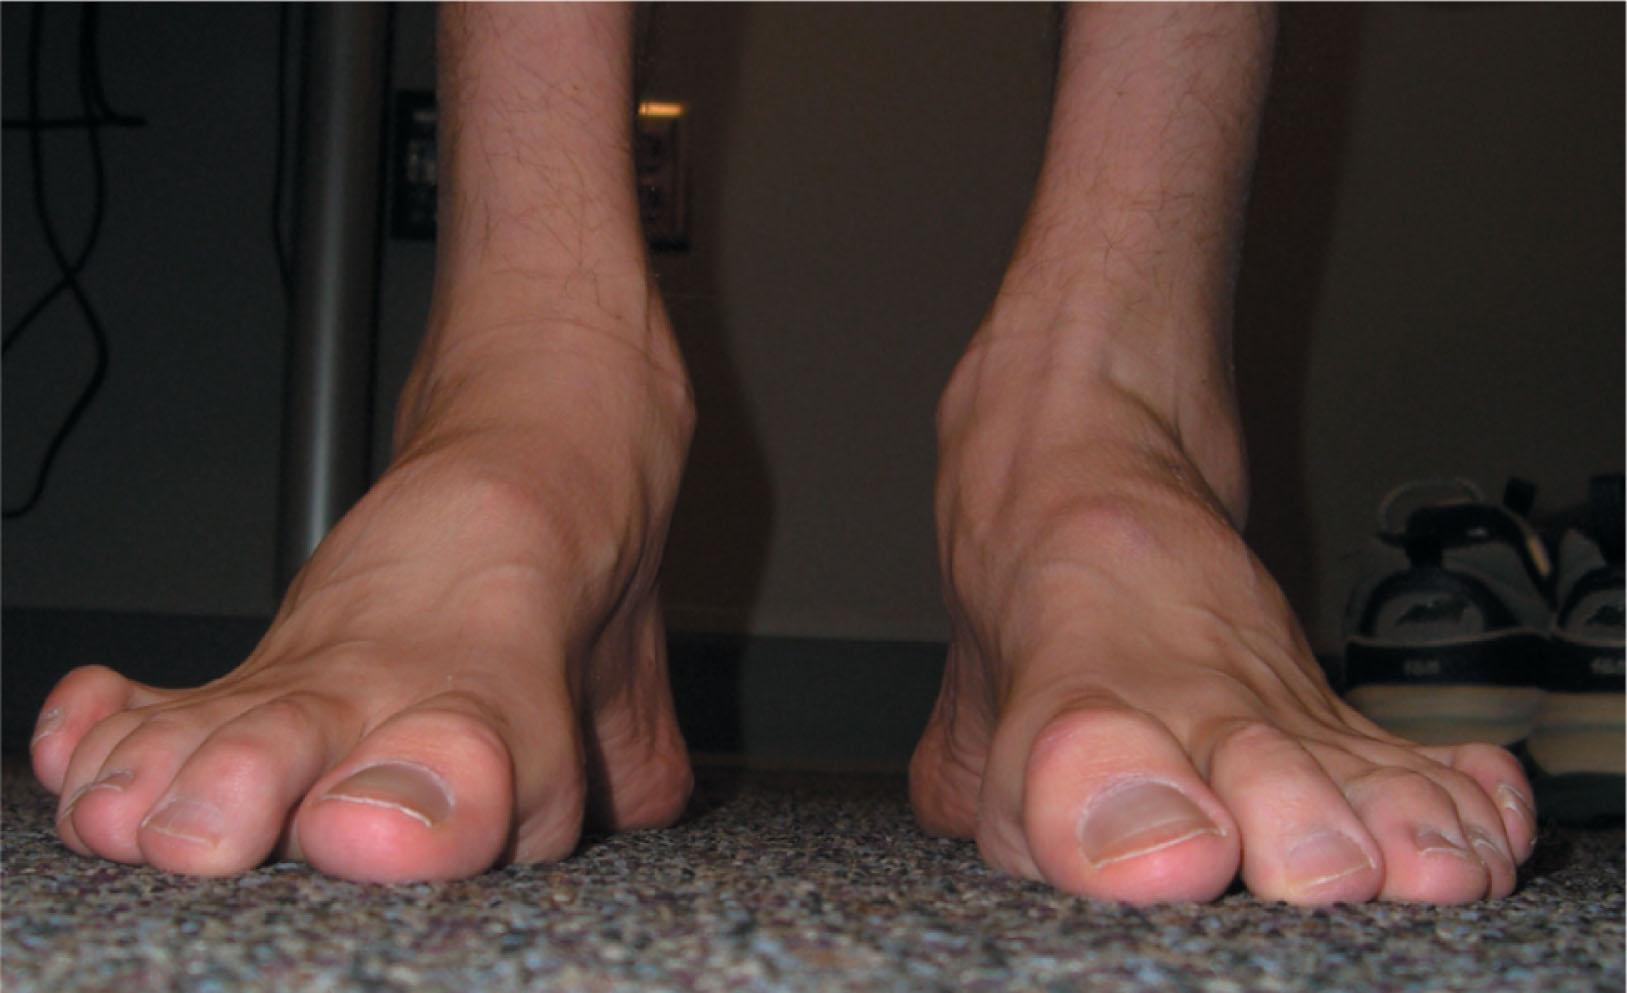 Fig. 19-1, Foot and ankle images of a patient with Charcot-Marie-Tooth disease demonstrating peek-a-boo heel, consistent with hindfoot varus, a plantar-flexed first ray, and clawing of the lesser toes. Note the significant leg musculature wasting.